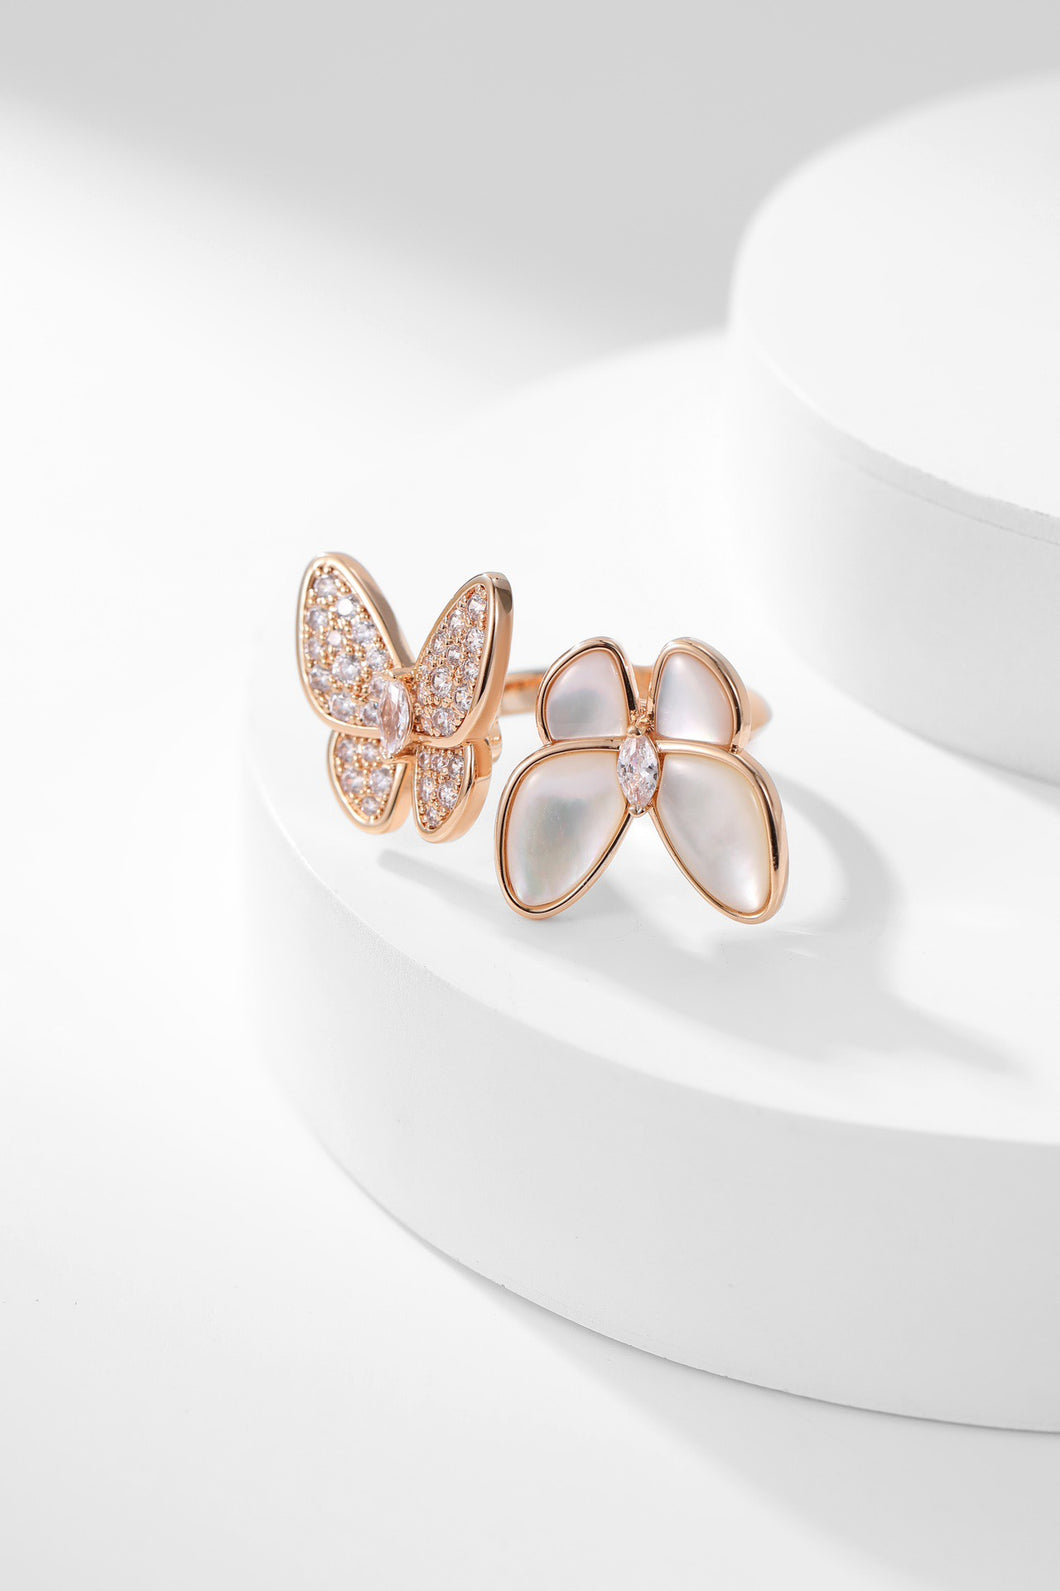 Enchanted Garden Collection: Mother-of-Pearl Butterfly & Flower Rings with Silver Rose Gold Plating and Natural Zircon